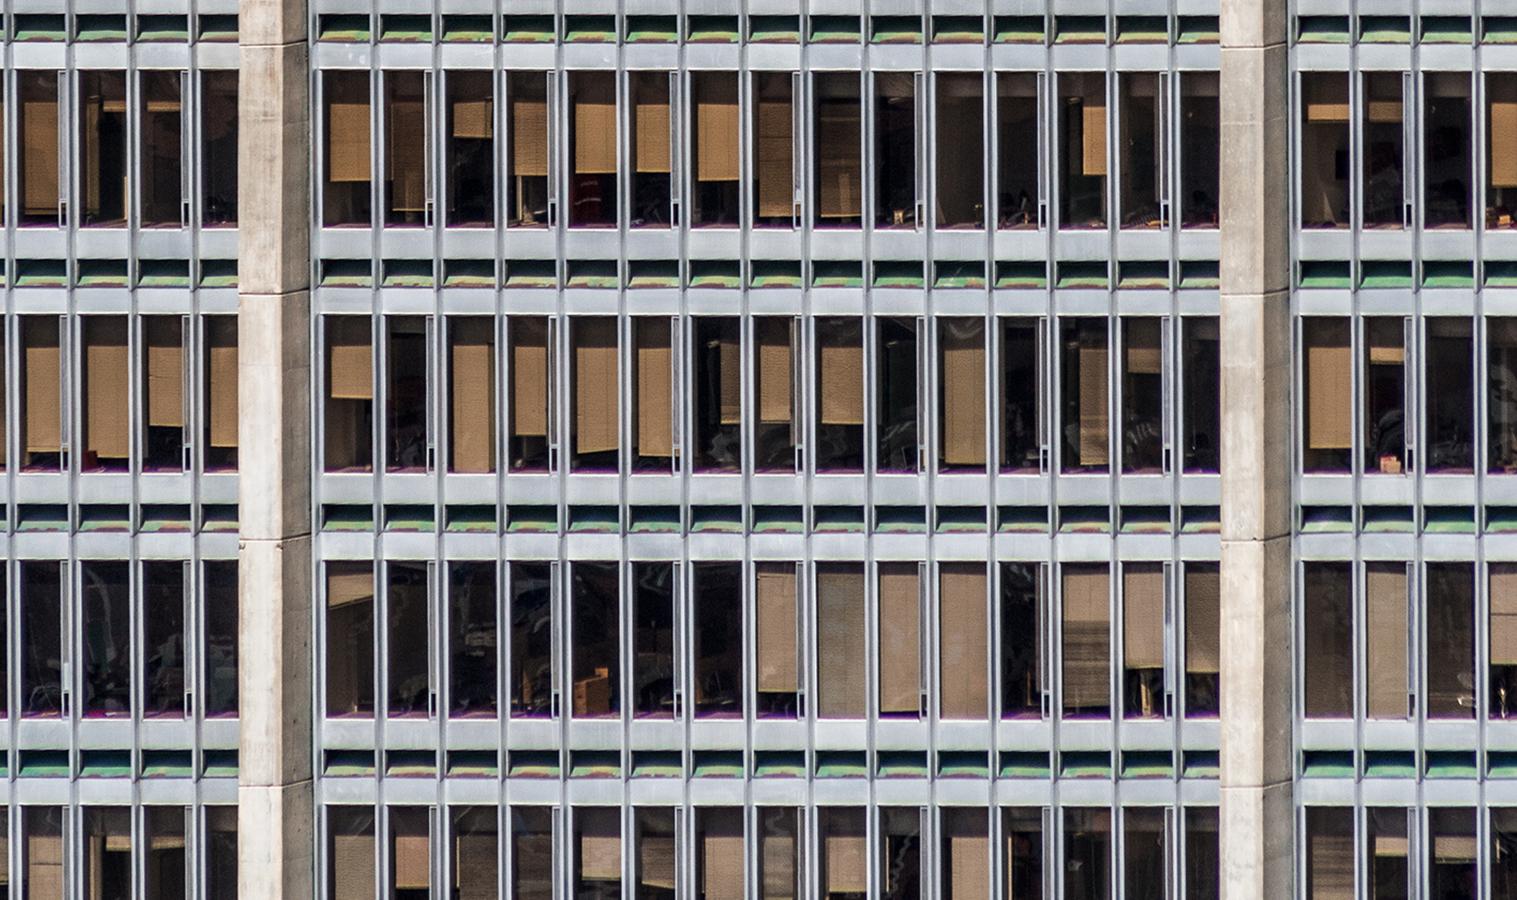 1001 Windows. Abstract architectural  landscape color photograph  - Contemporary Photograph by Javier Rey